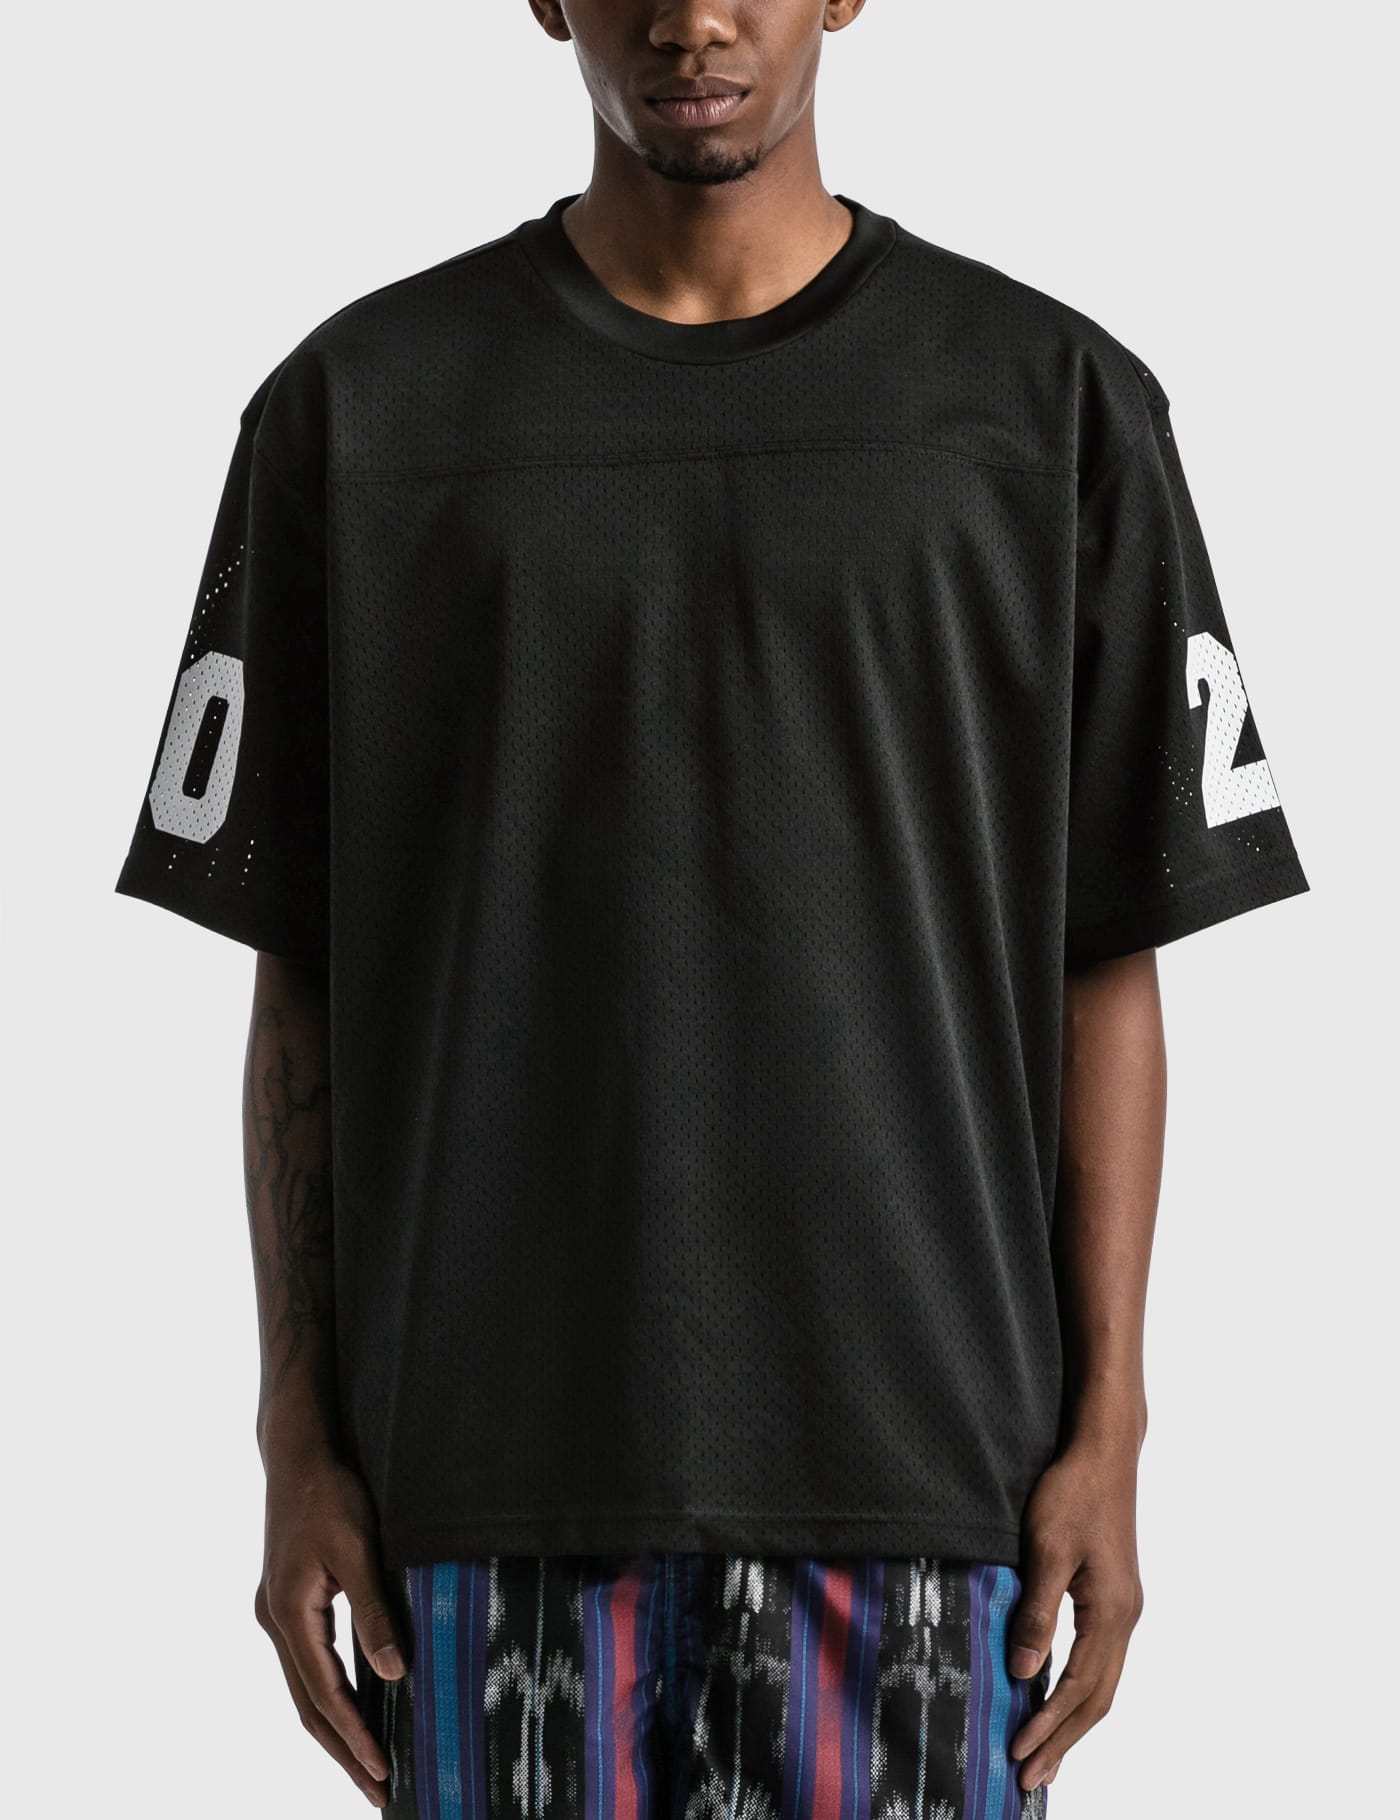 Stüssy - Mesh Football Jersey | HBX - Globally Curated Fashion and 